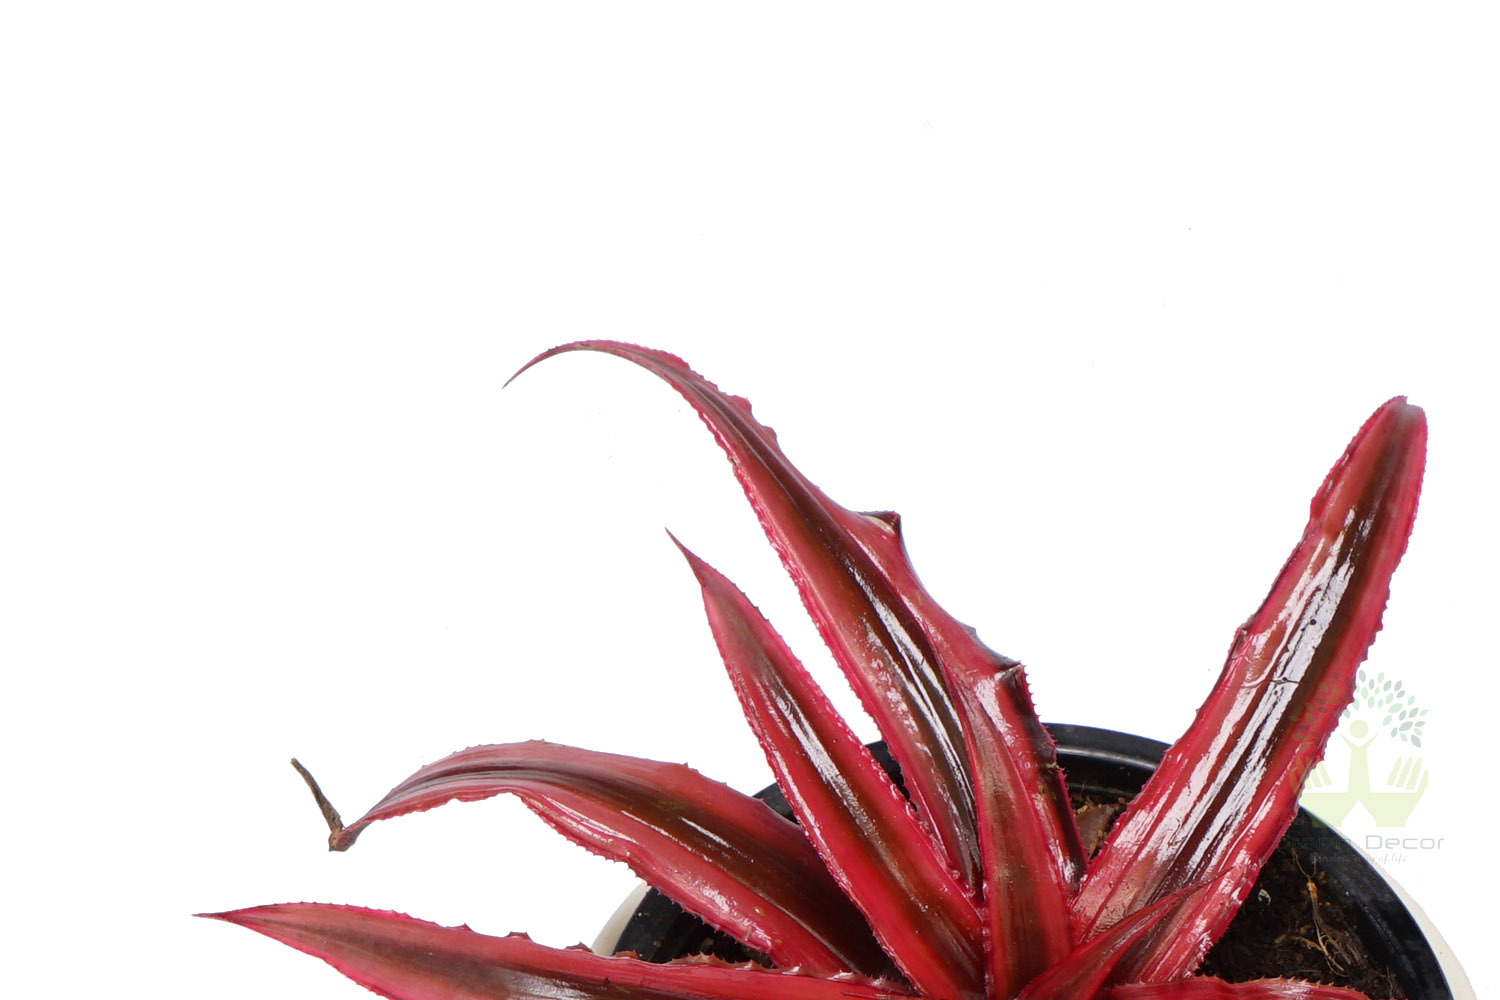 Buy Cryptanthus Plant Top View, White Pots and Seeds in Delhi NCR by the best online nursery shop Greendecor.